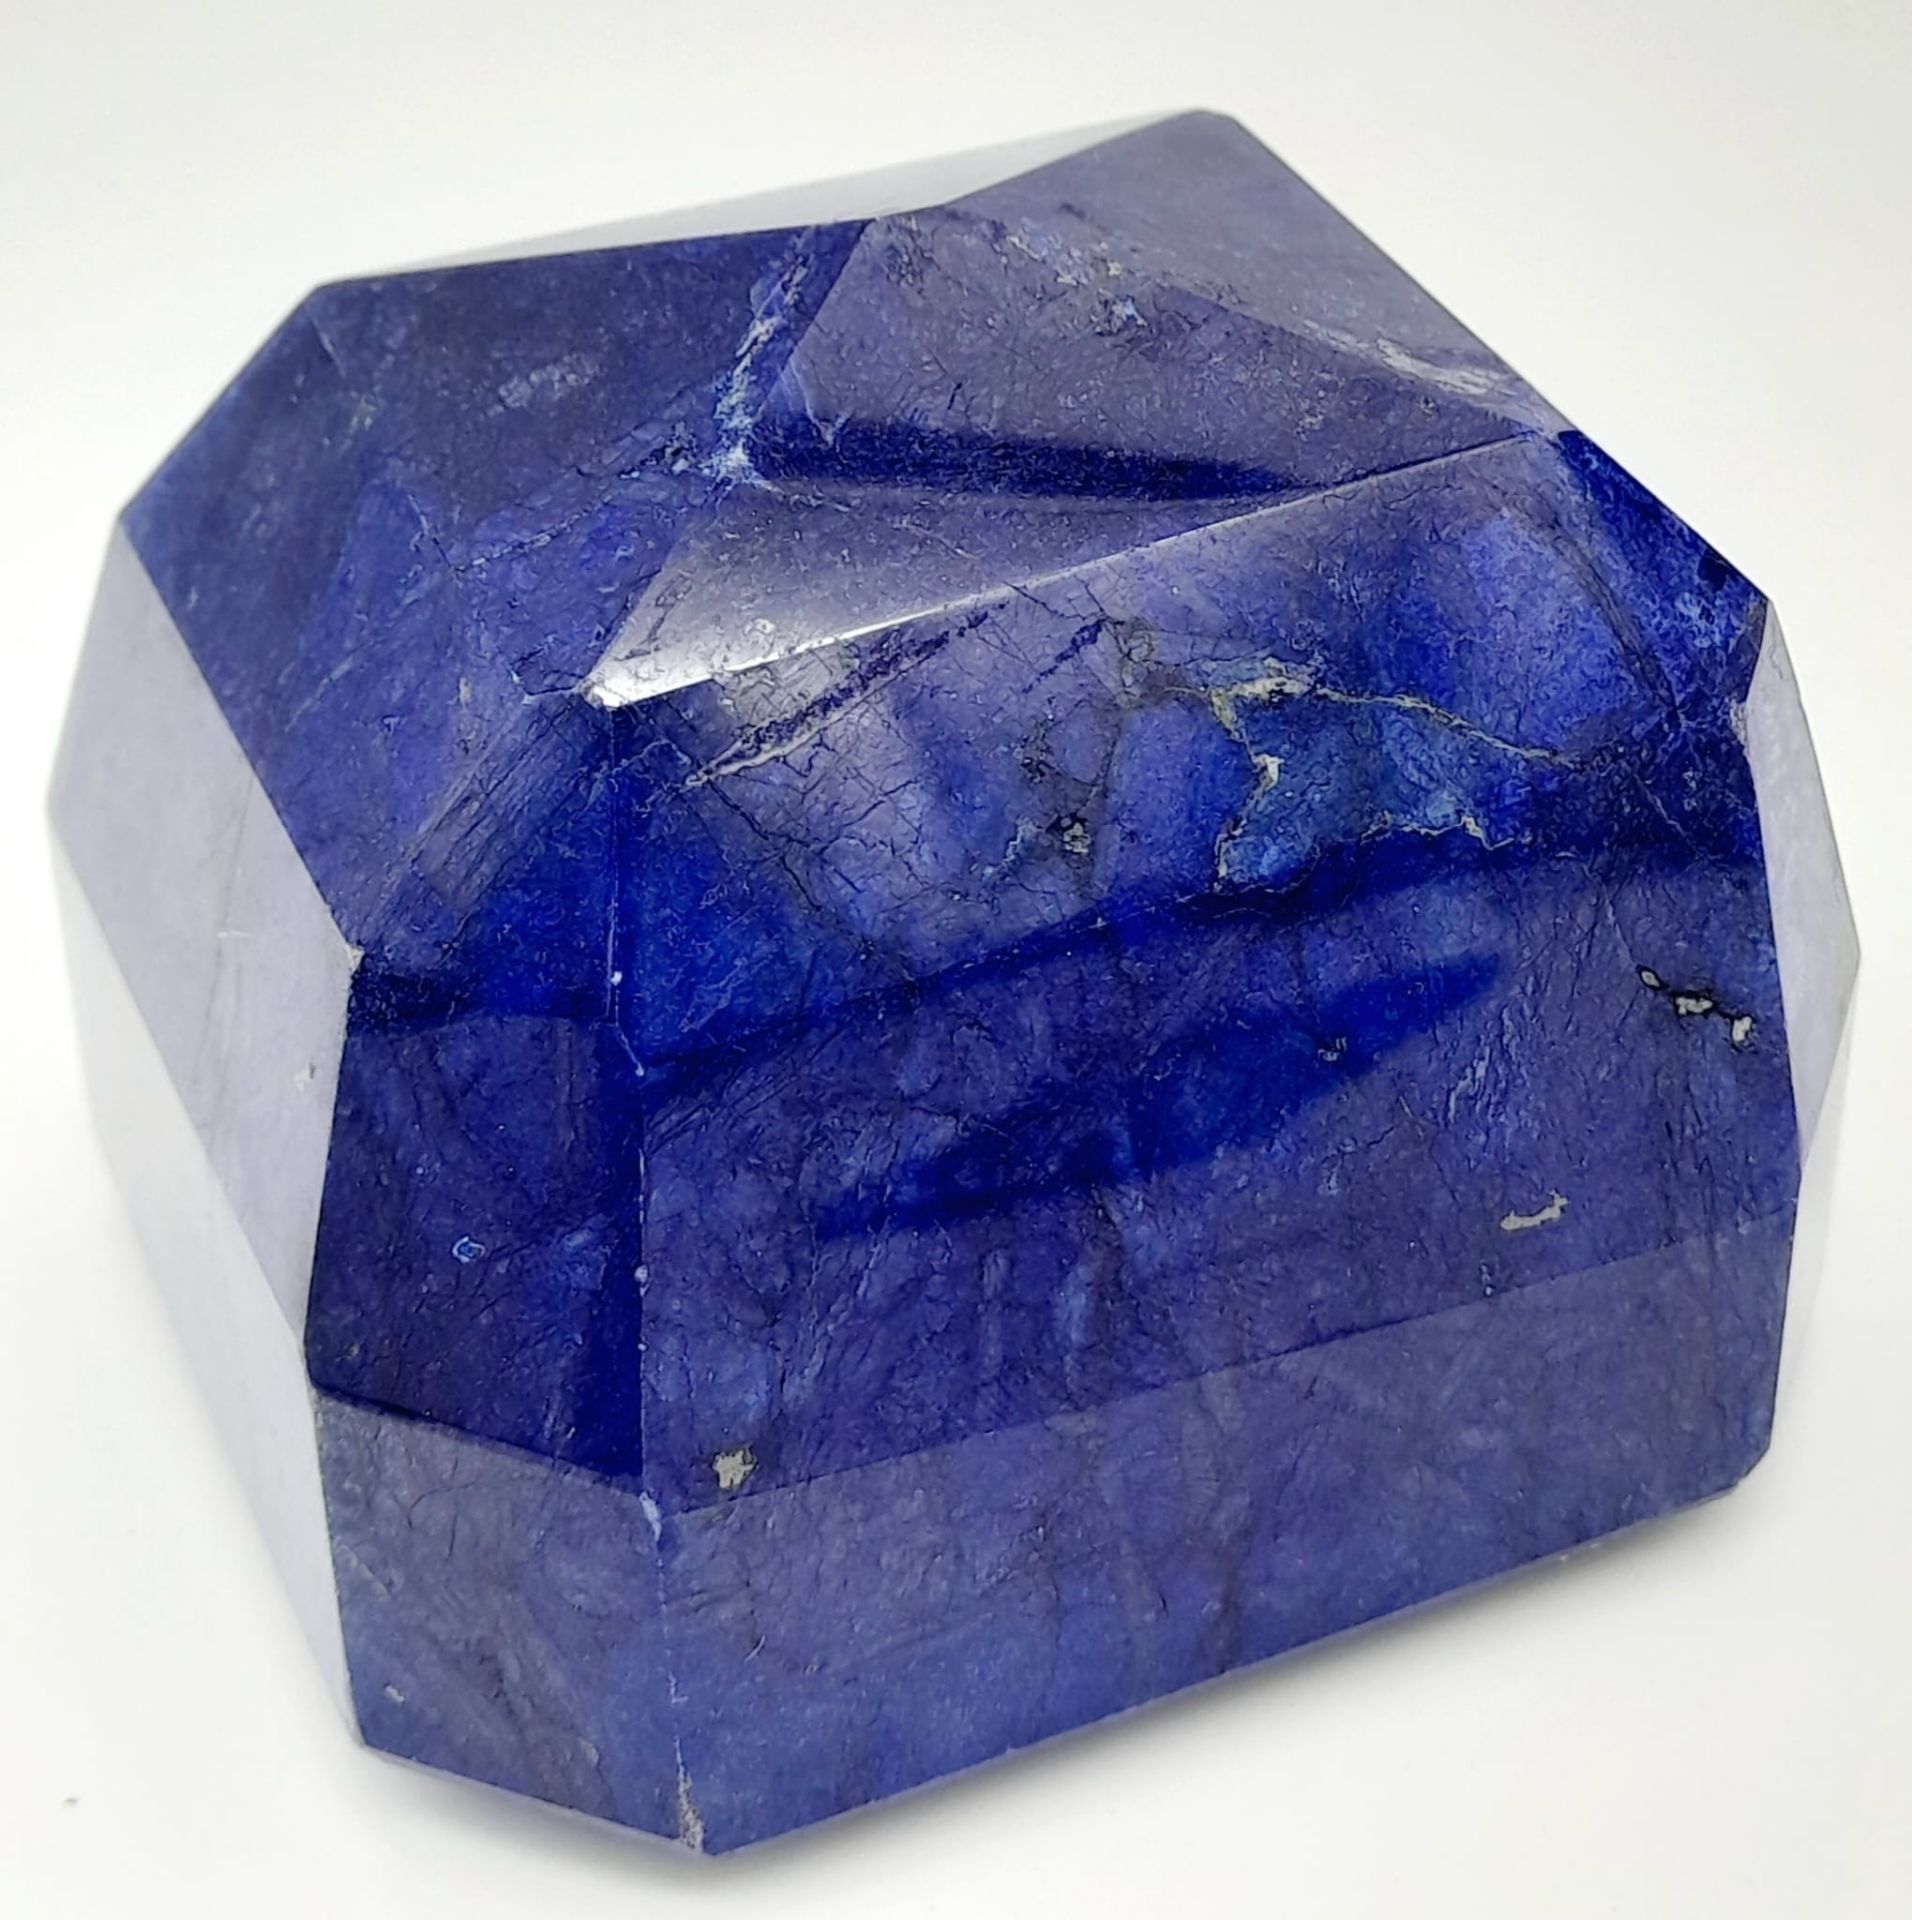 A 4230ct Rare Natural Blue Sapphire, Octagonal Shape. Comes Complete with GLI Certificate. - Image 4 of 8